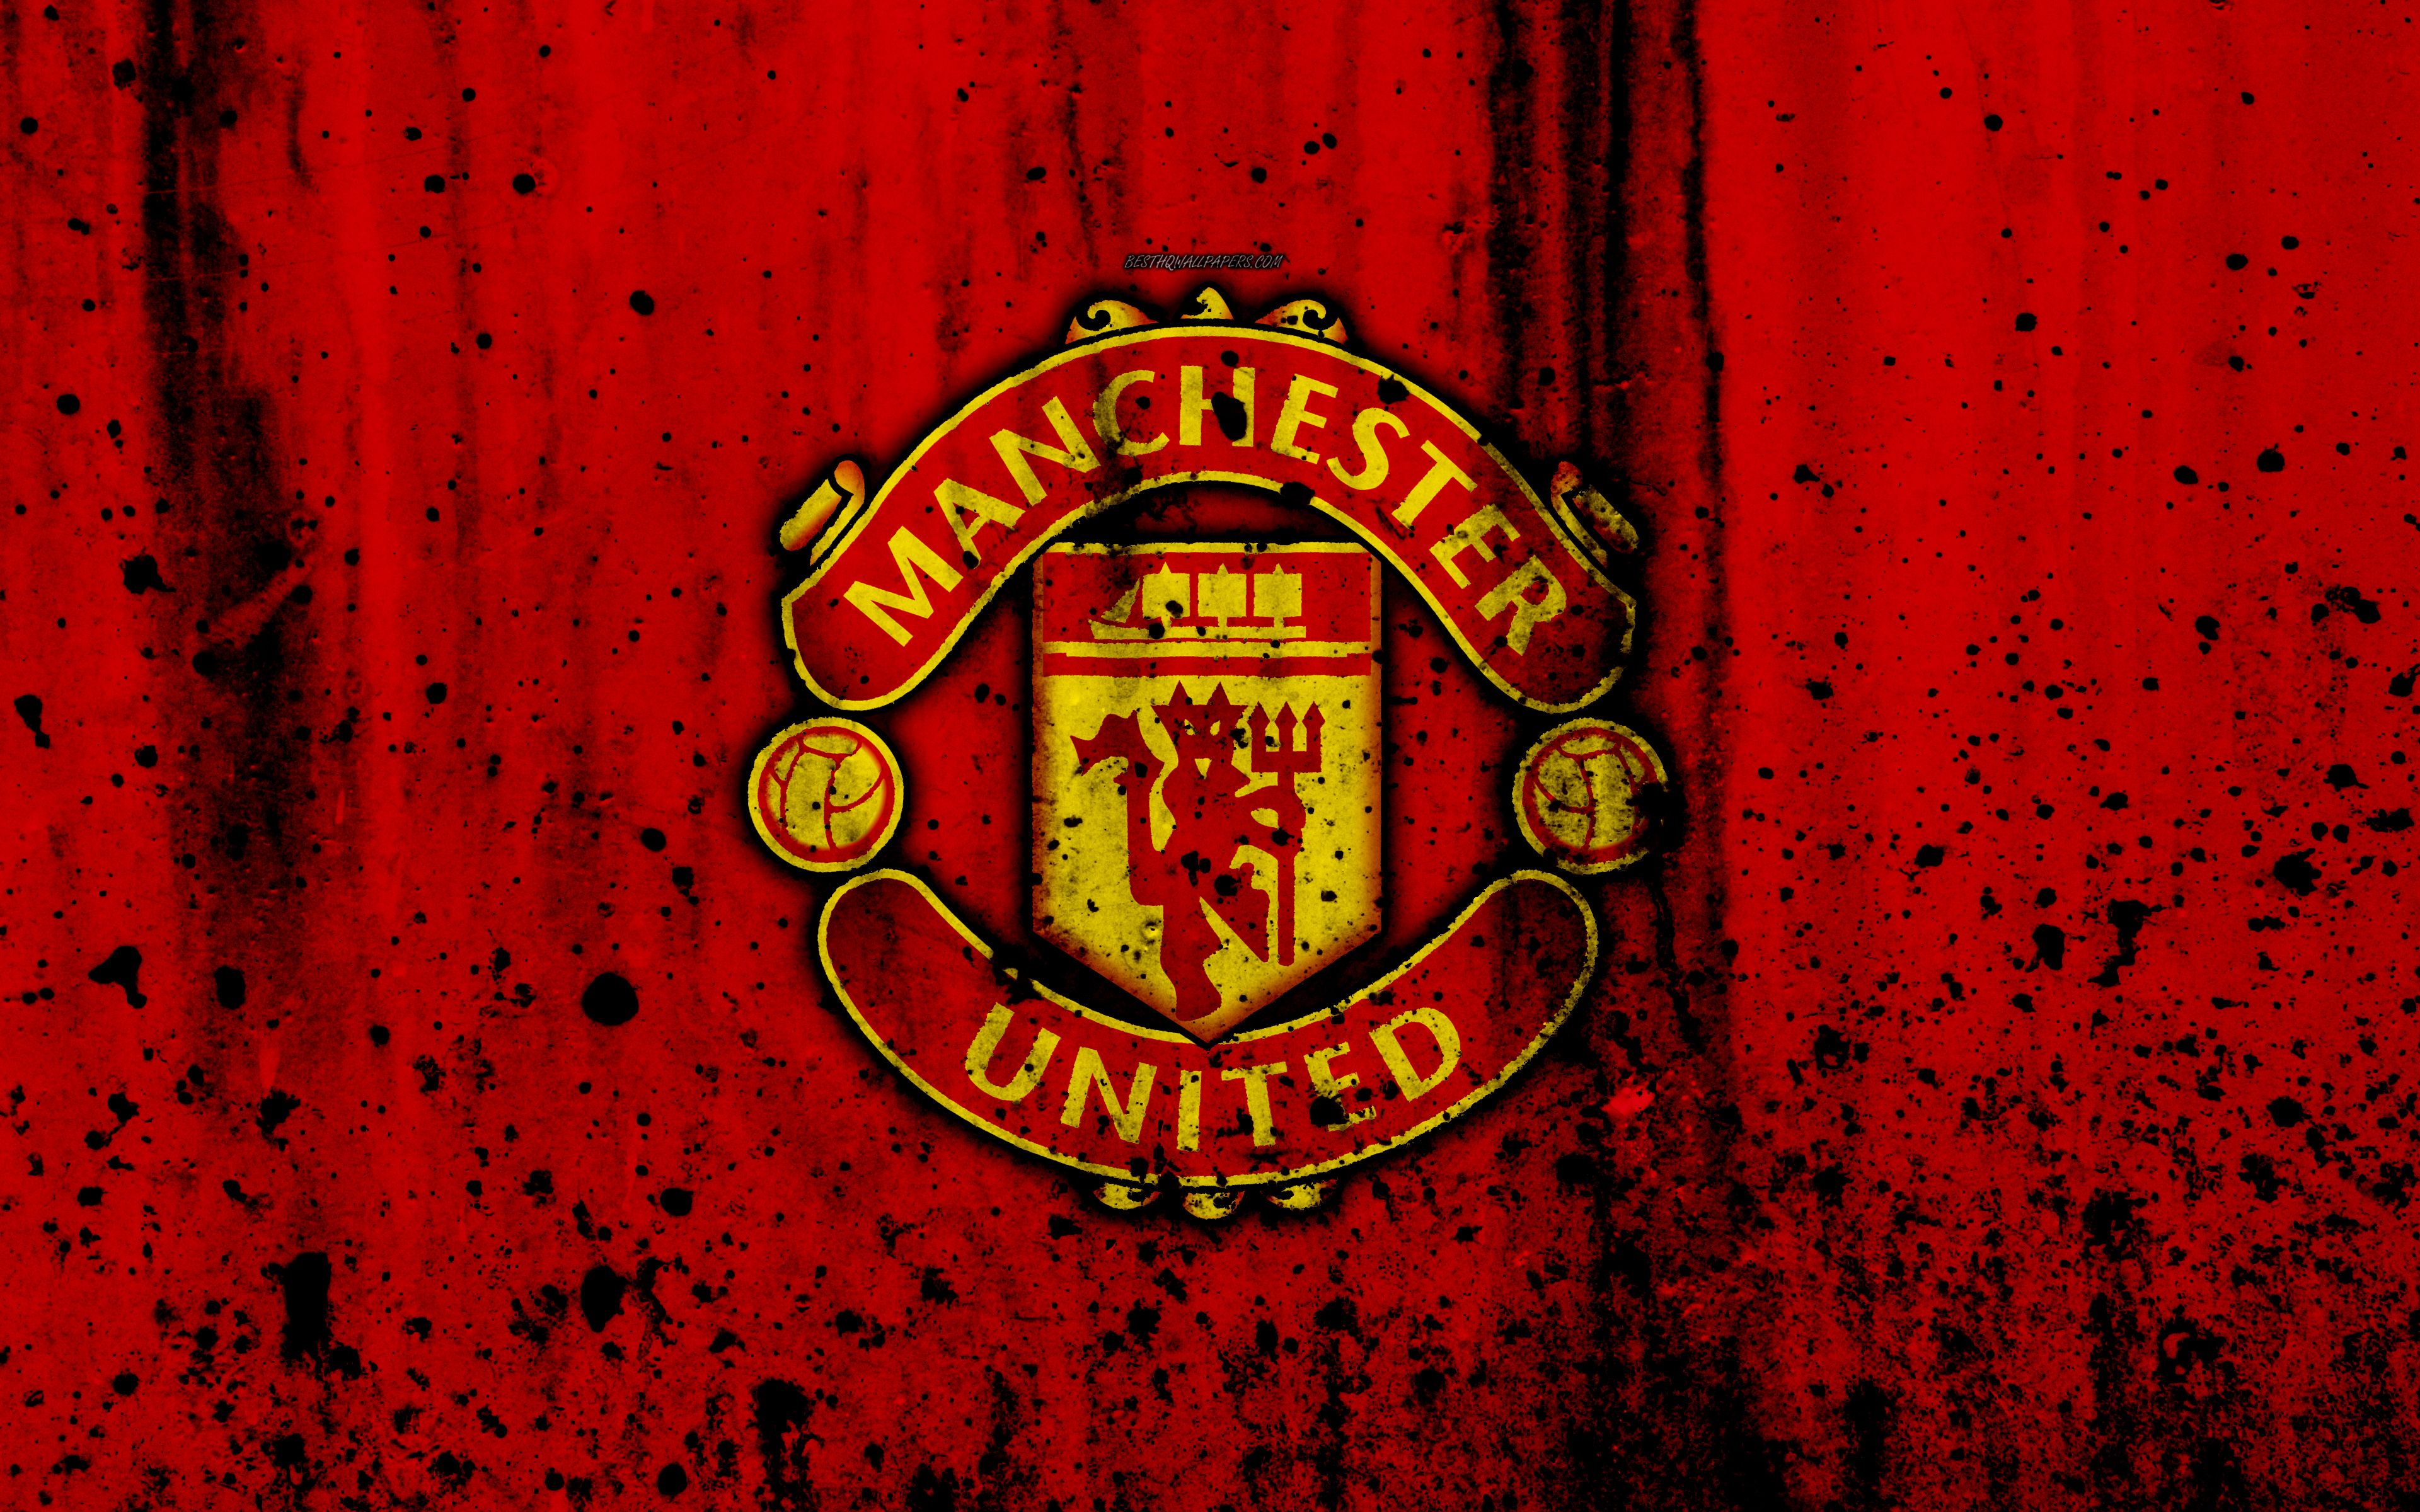 Manchester United Logo Hd Wallpapers 1080p